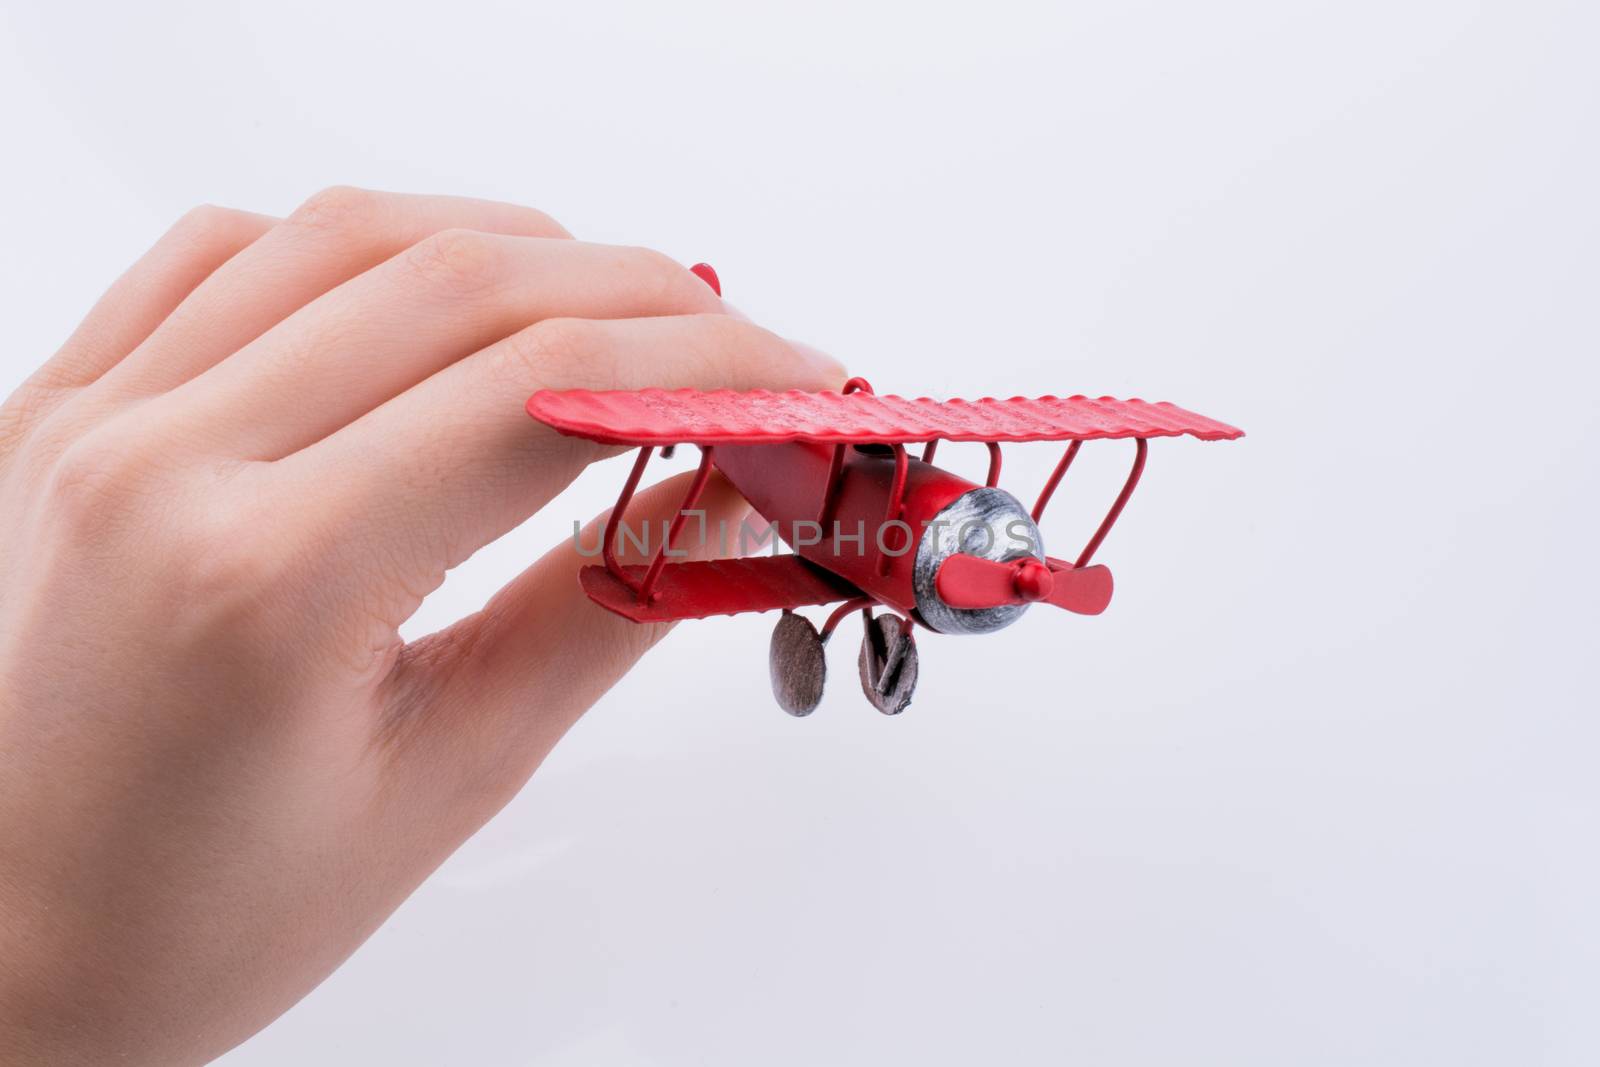 Hand holding a red toy plane on a white background